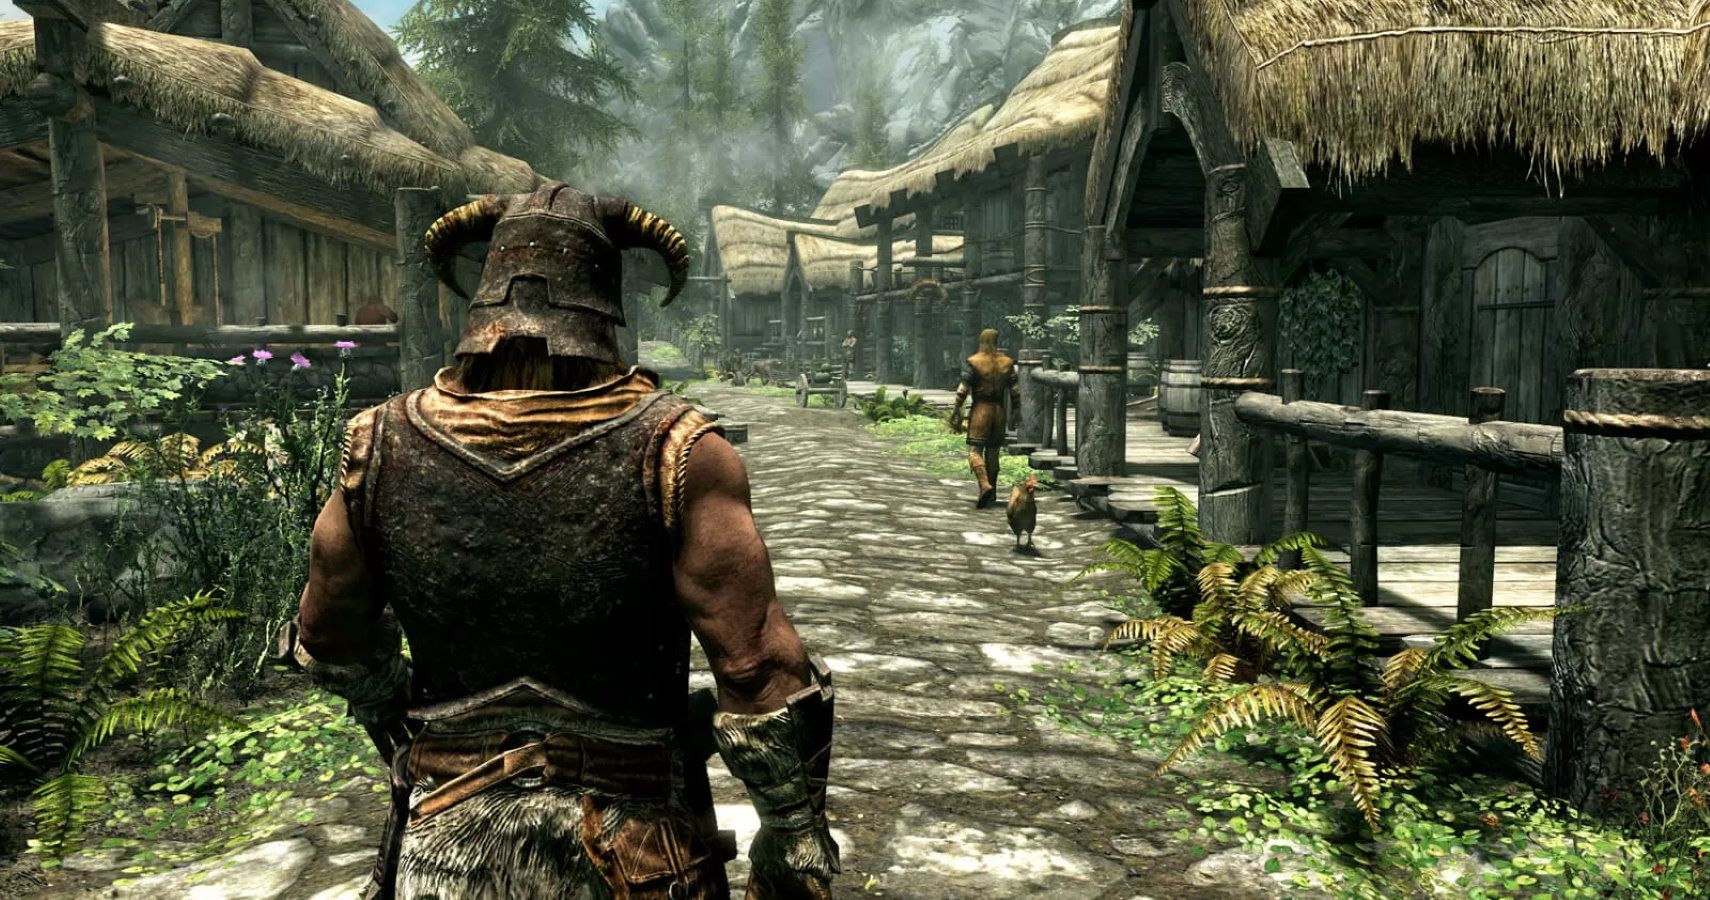 You Can Use Mods To Play Skyrim At 60fps On Xbox (And Its On Game Pass Now)